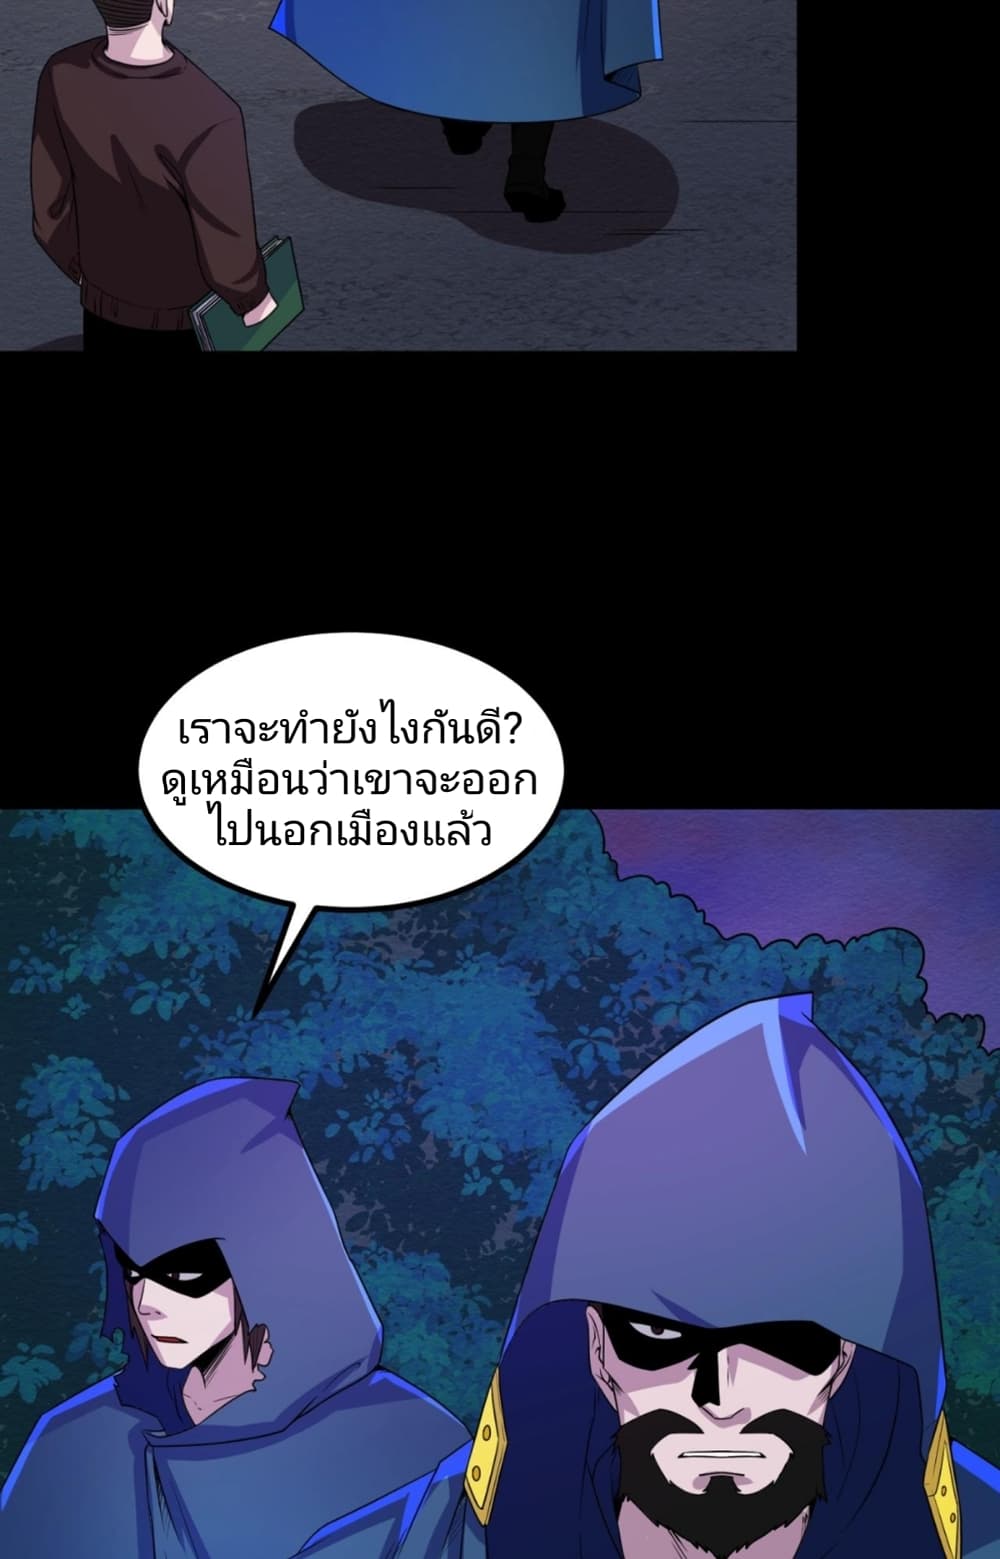 The Age of Ghost Spirits à¸à¸­à¸à¸à¸µà¹ 9 (5)